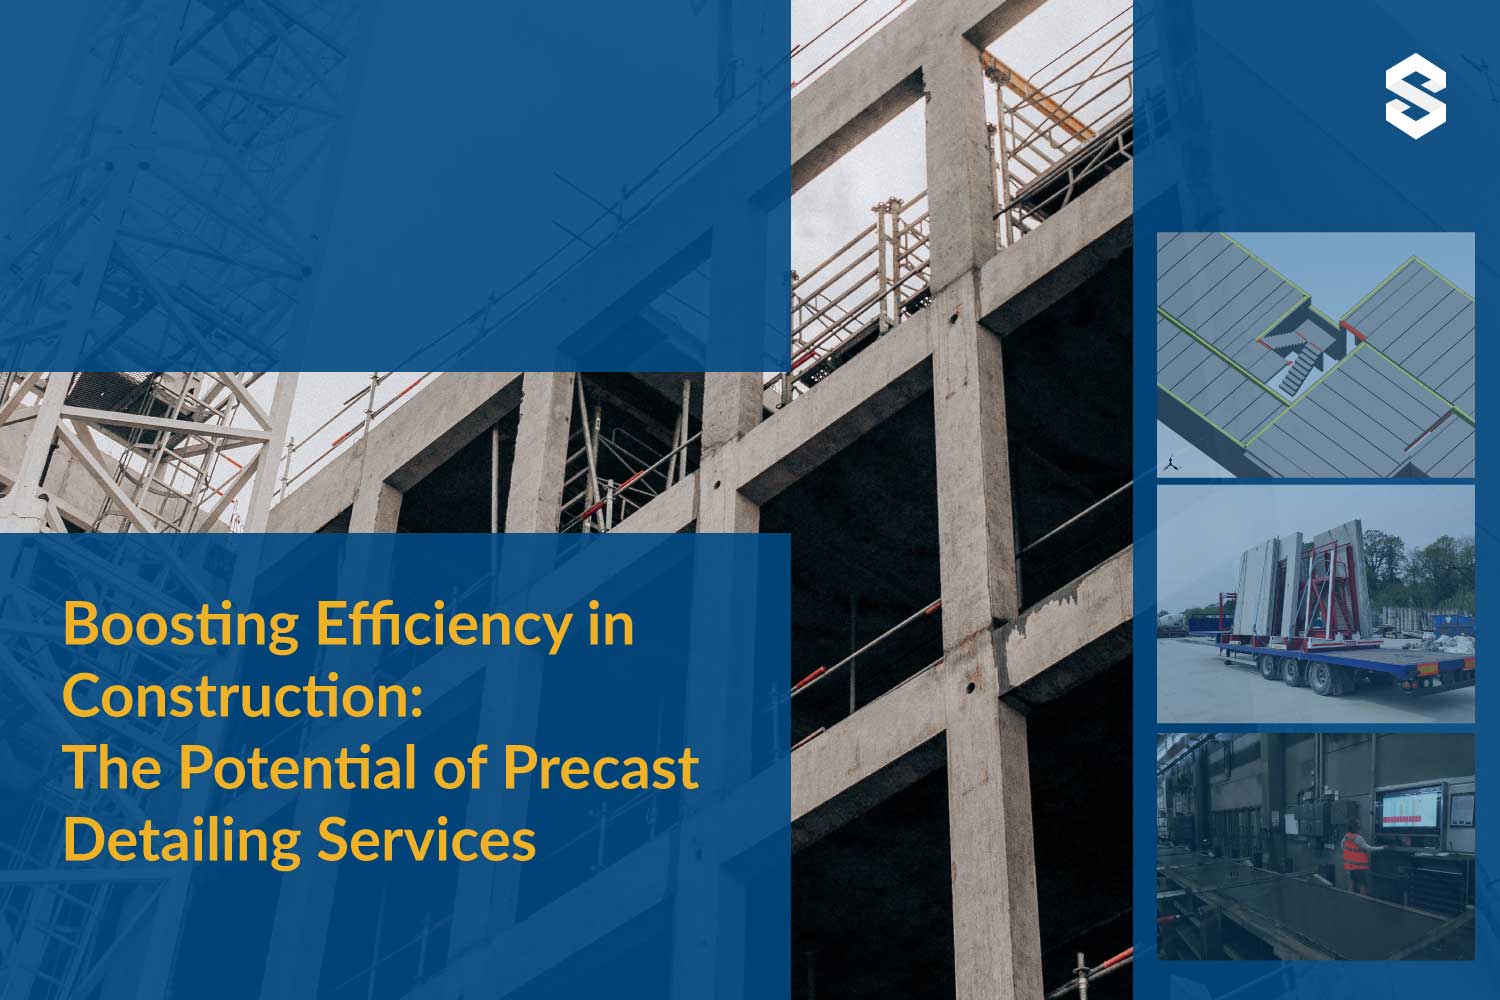 The Potential of Precast Detailing Services by StruEngineers